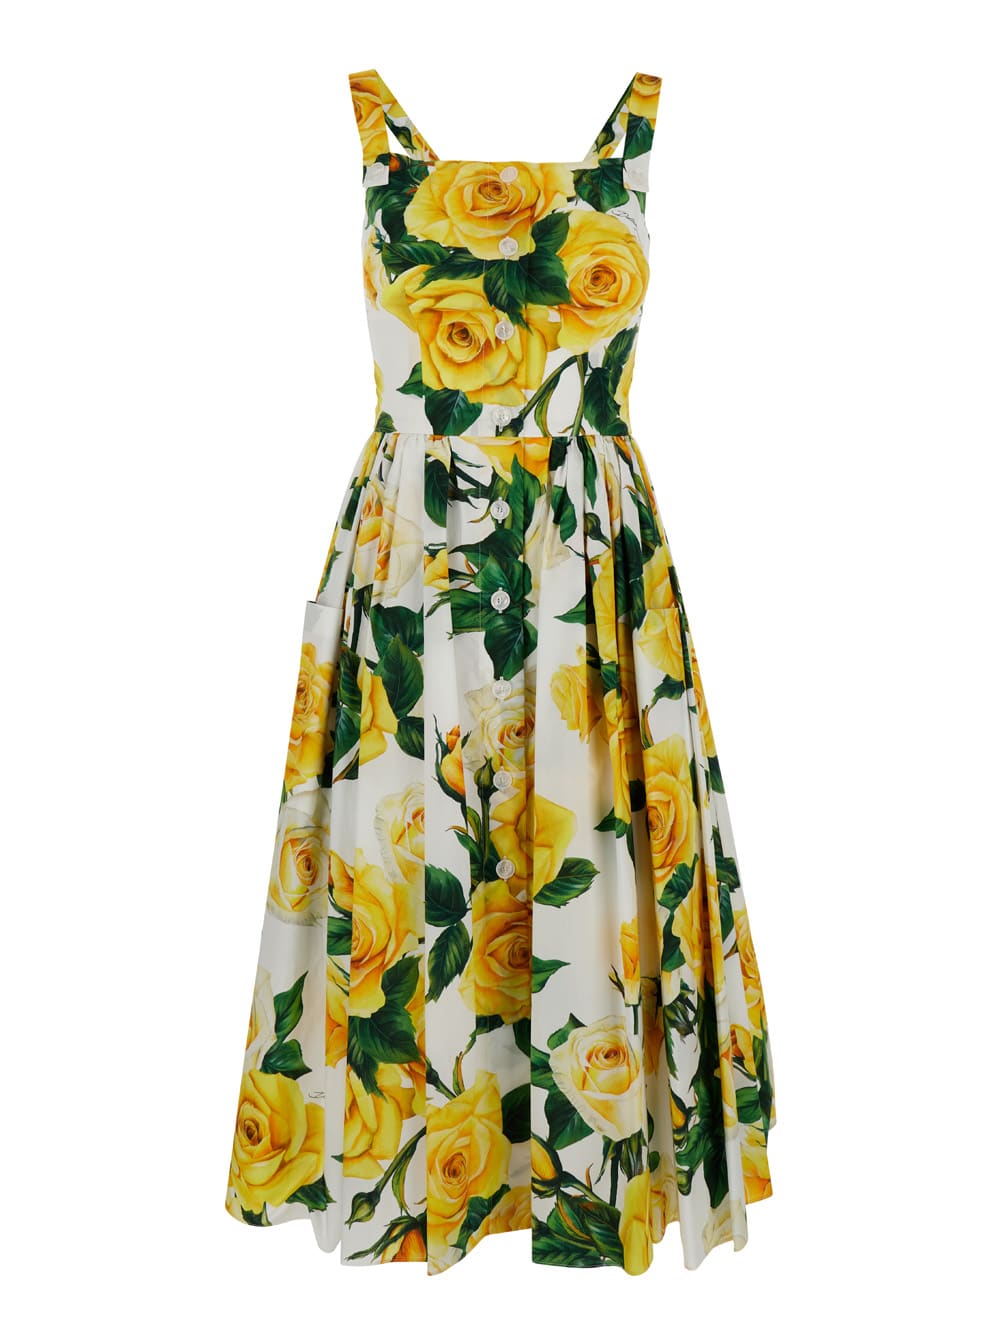 DOLCE & GABBANA YELLOW MIDI DRESS WITH ALL-OVER ROSE PRINT IN COTTON WOMAN